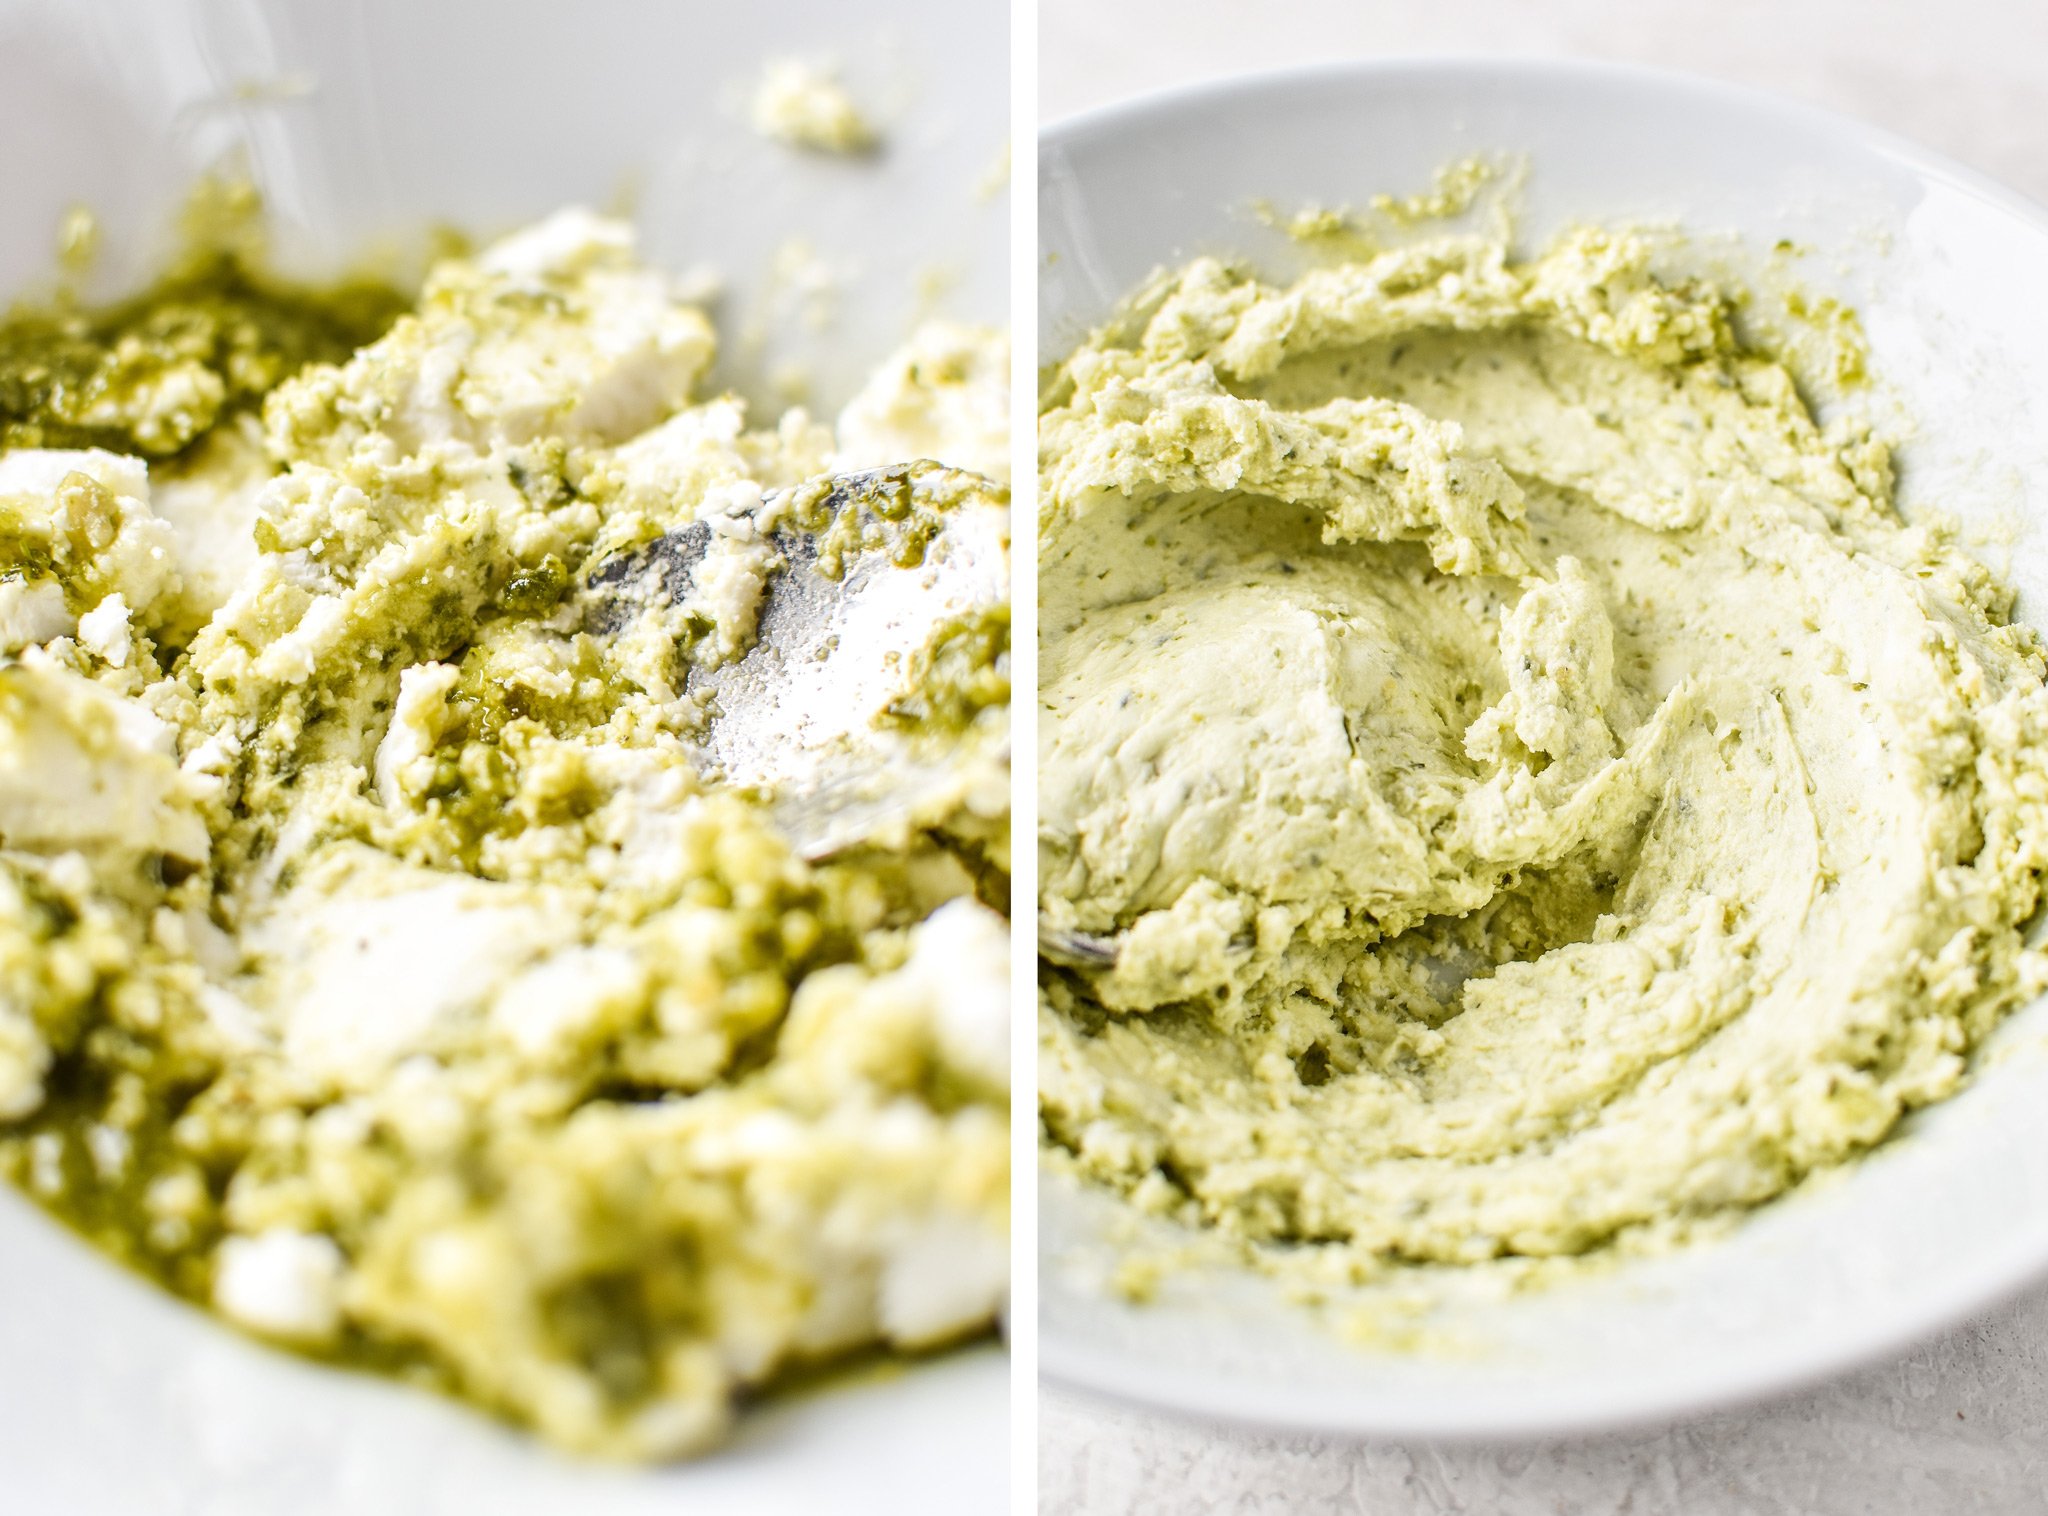 Mixing up the ingredients in the Pesto Goat Cheese Dip.